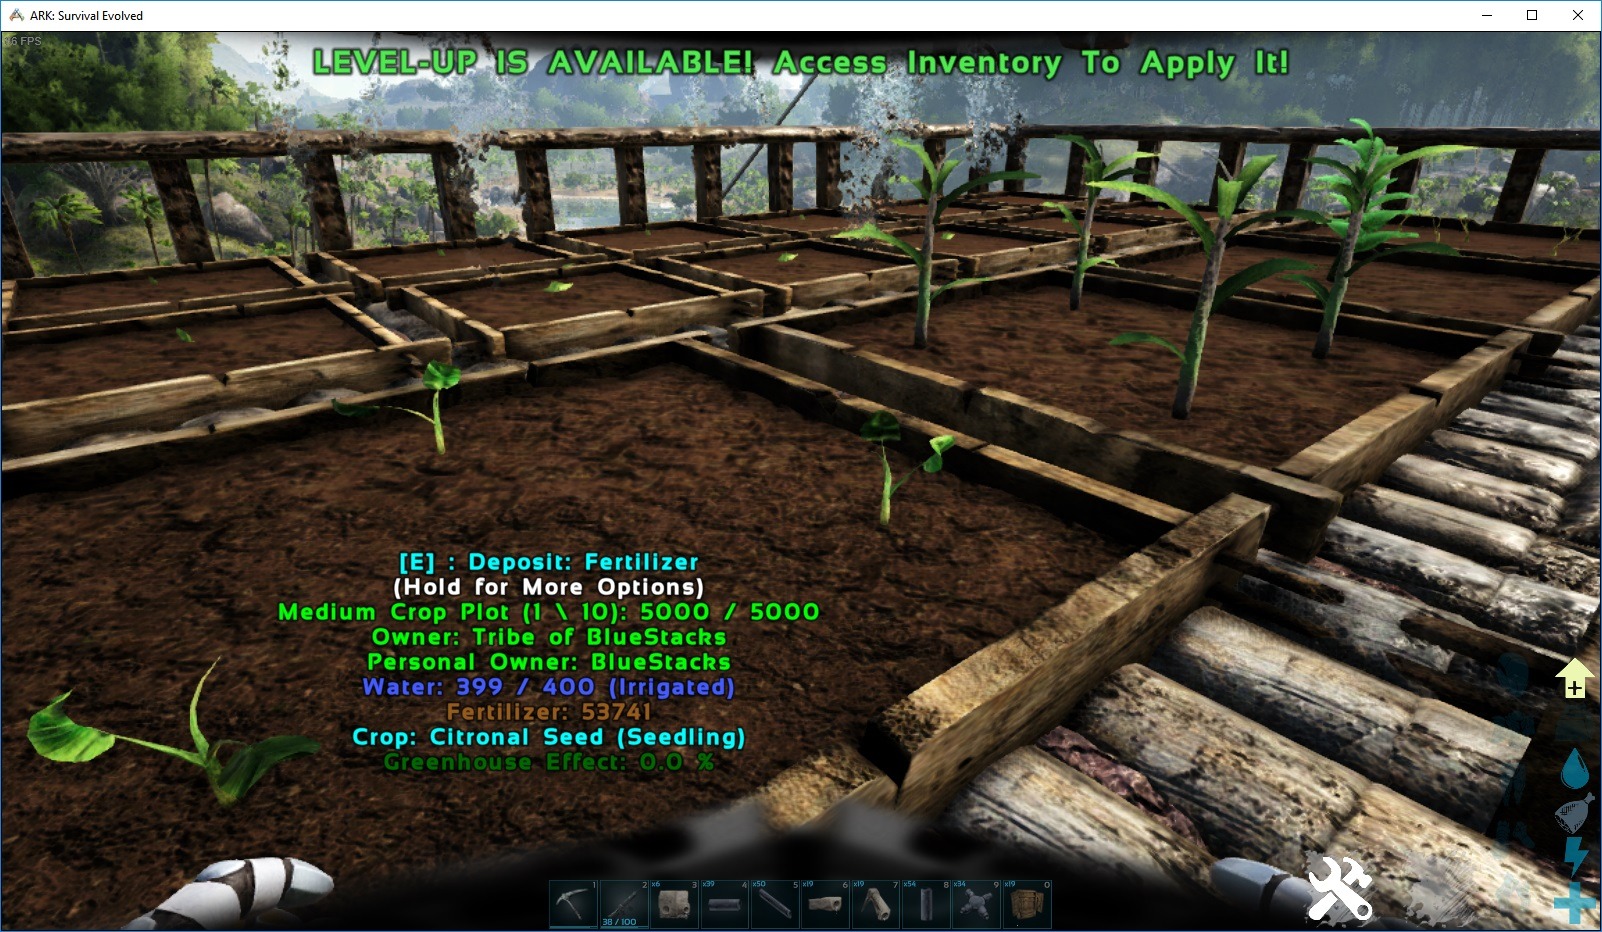 quality of life] Add hotkey to take crops from plots quickly without opening inventory. - Game Suggestions - ARK - Official Community Forums